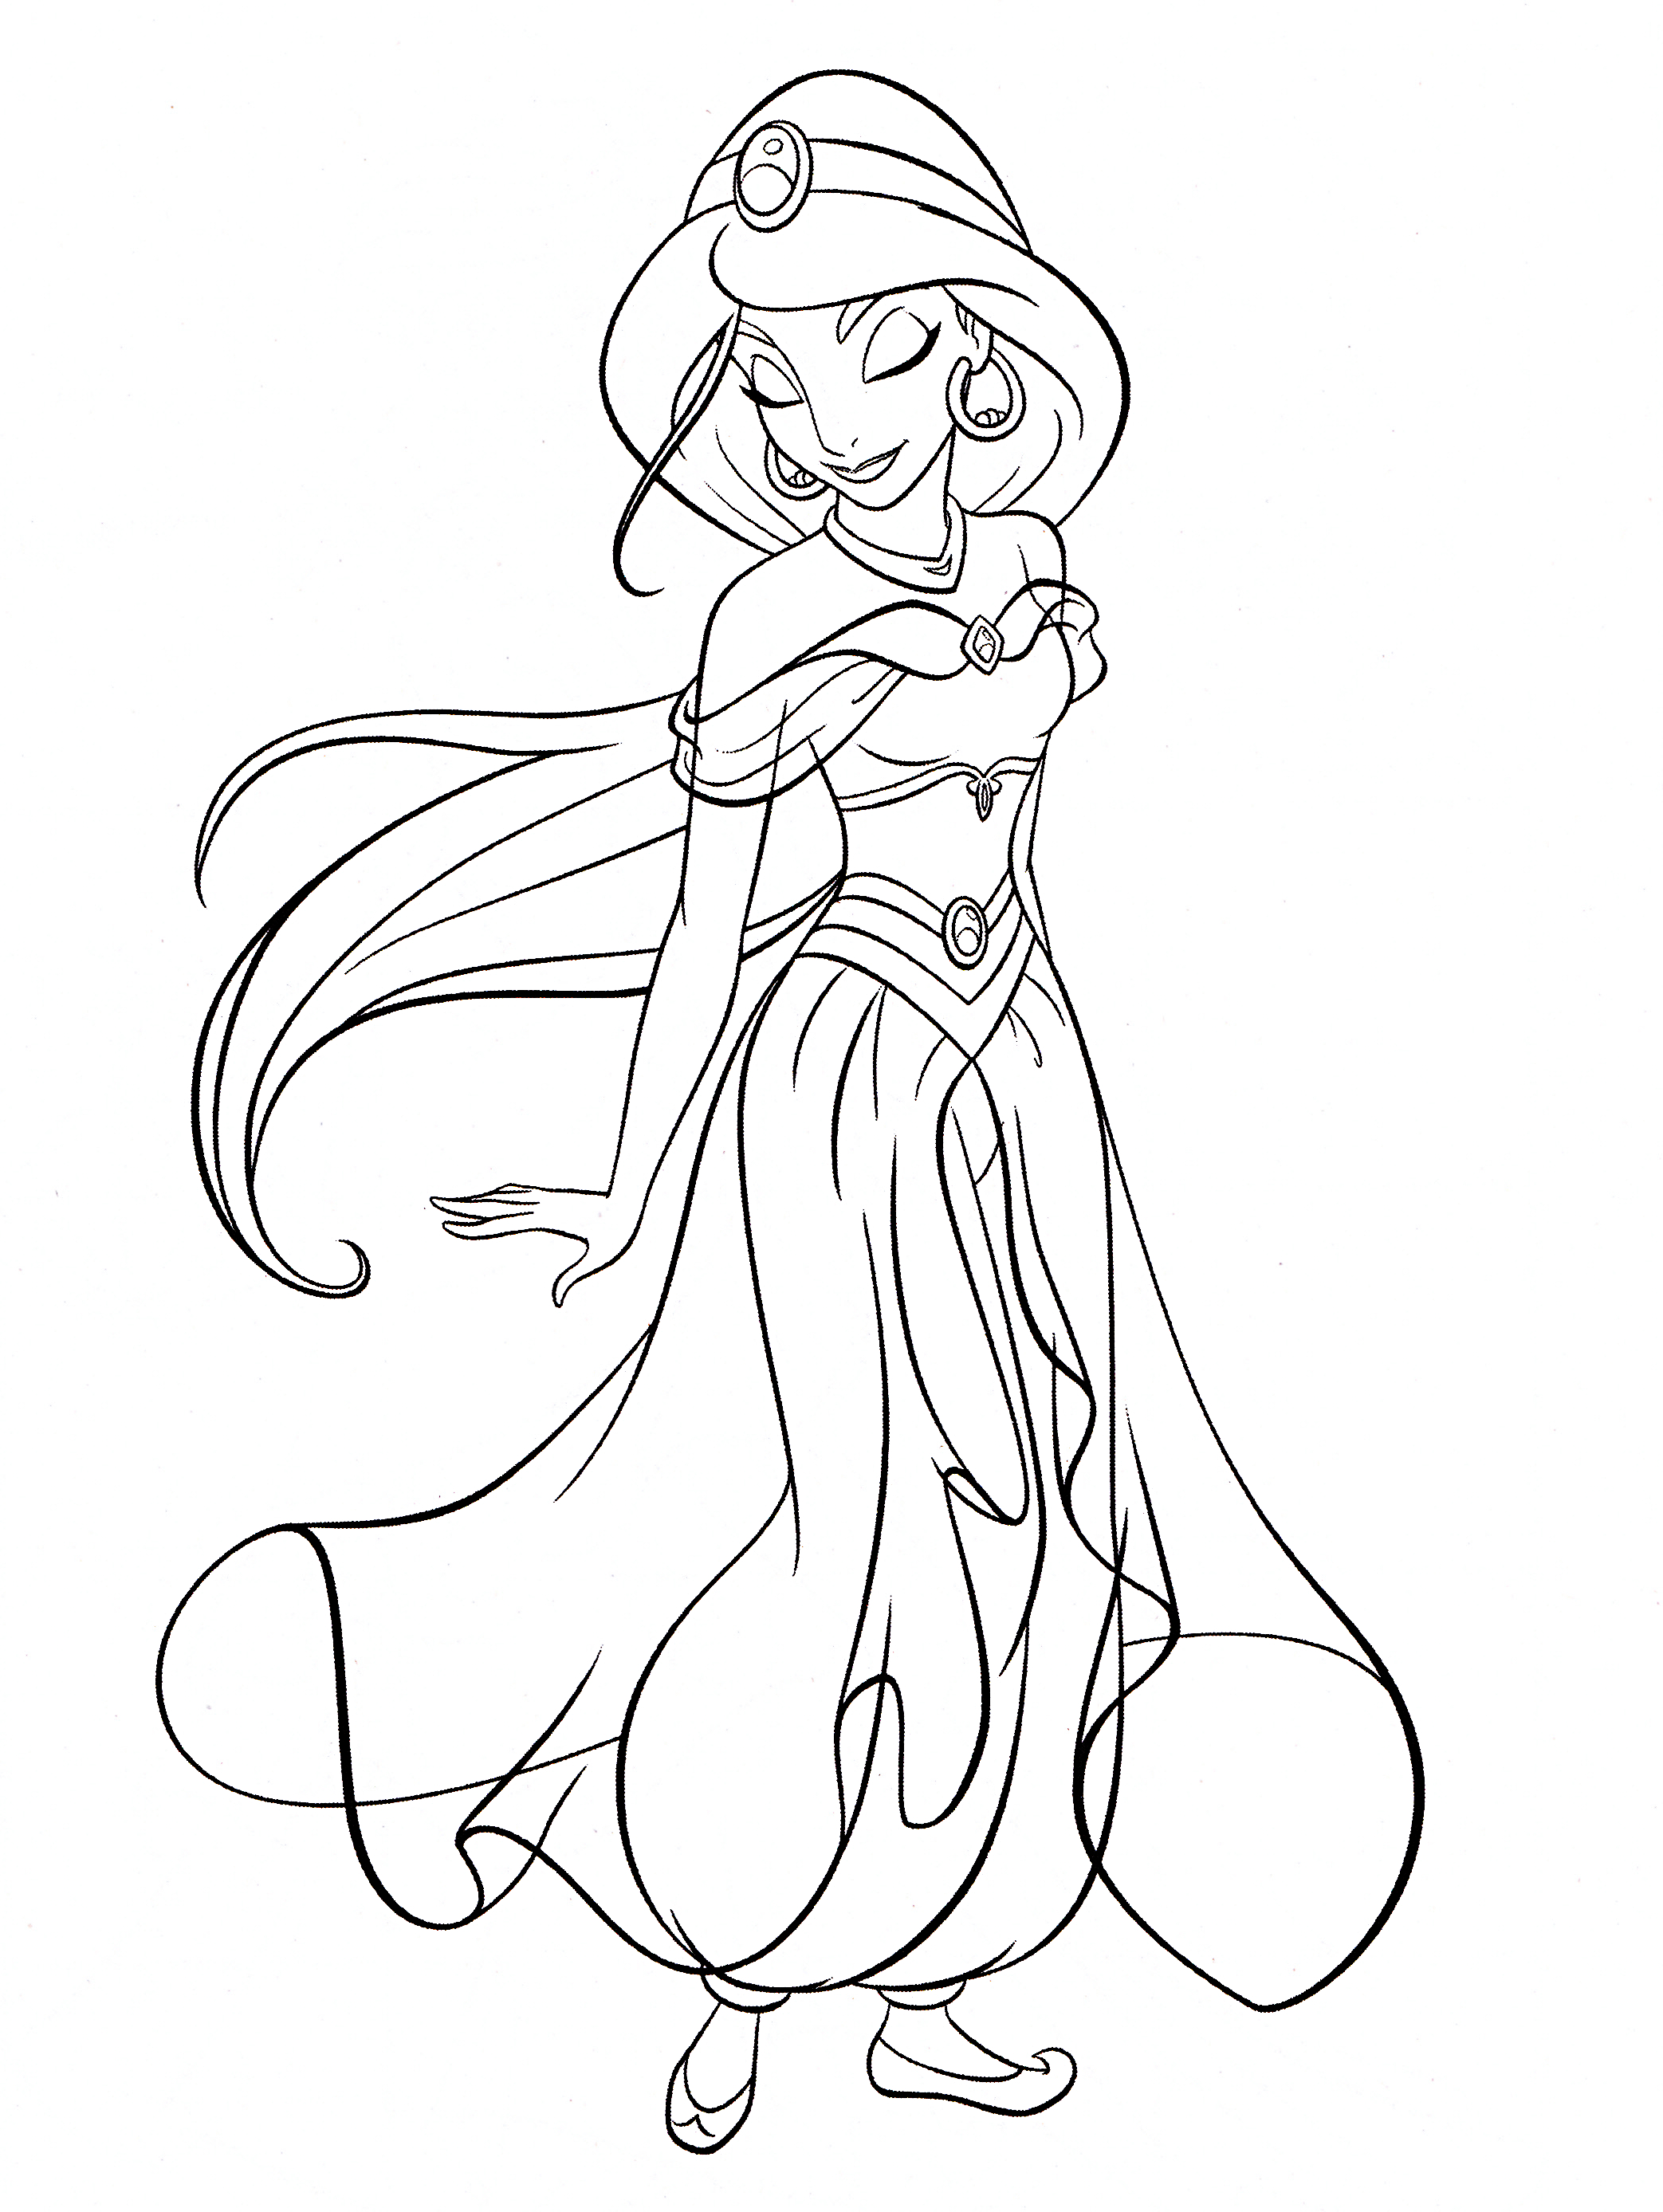 Coloring Pages : Disney Coloring Pages Colornumber Oliver And - Free Printable Princess Jasmine Coloring Pages